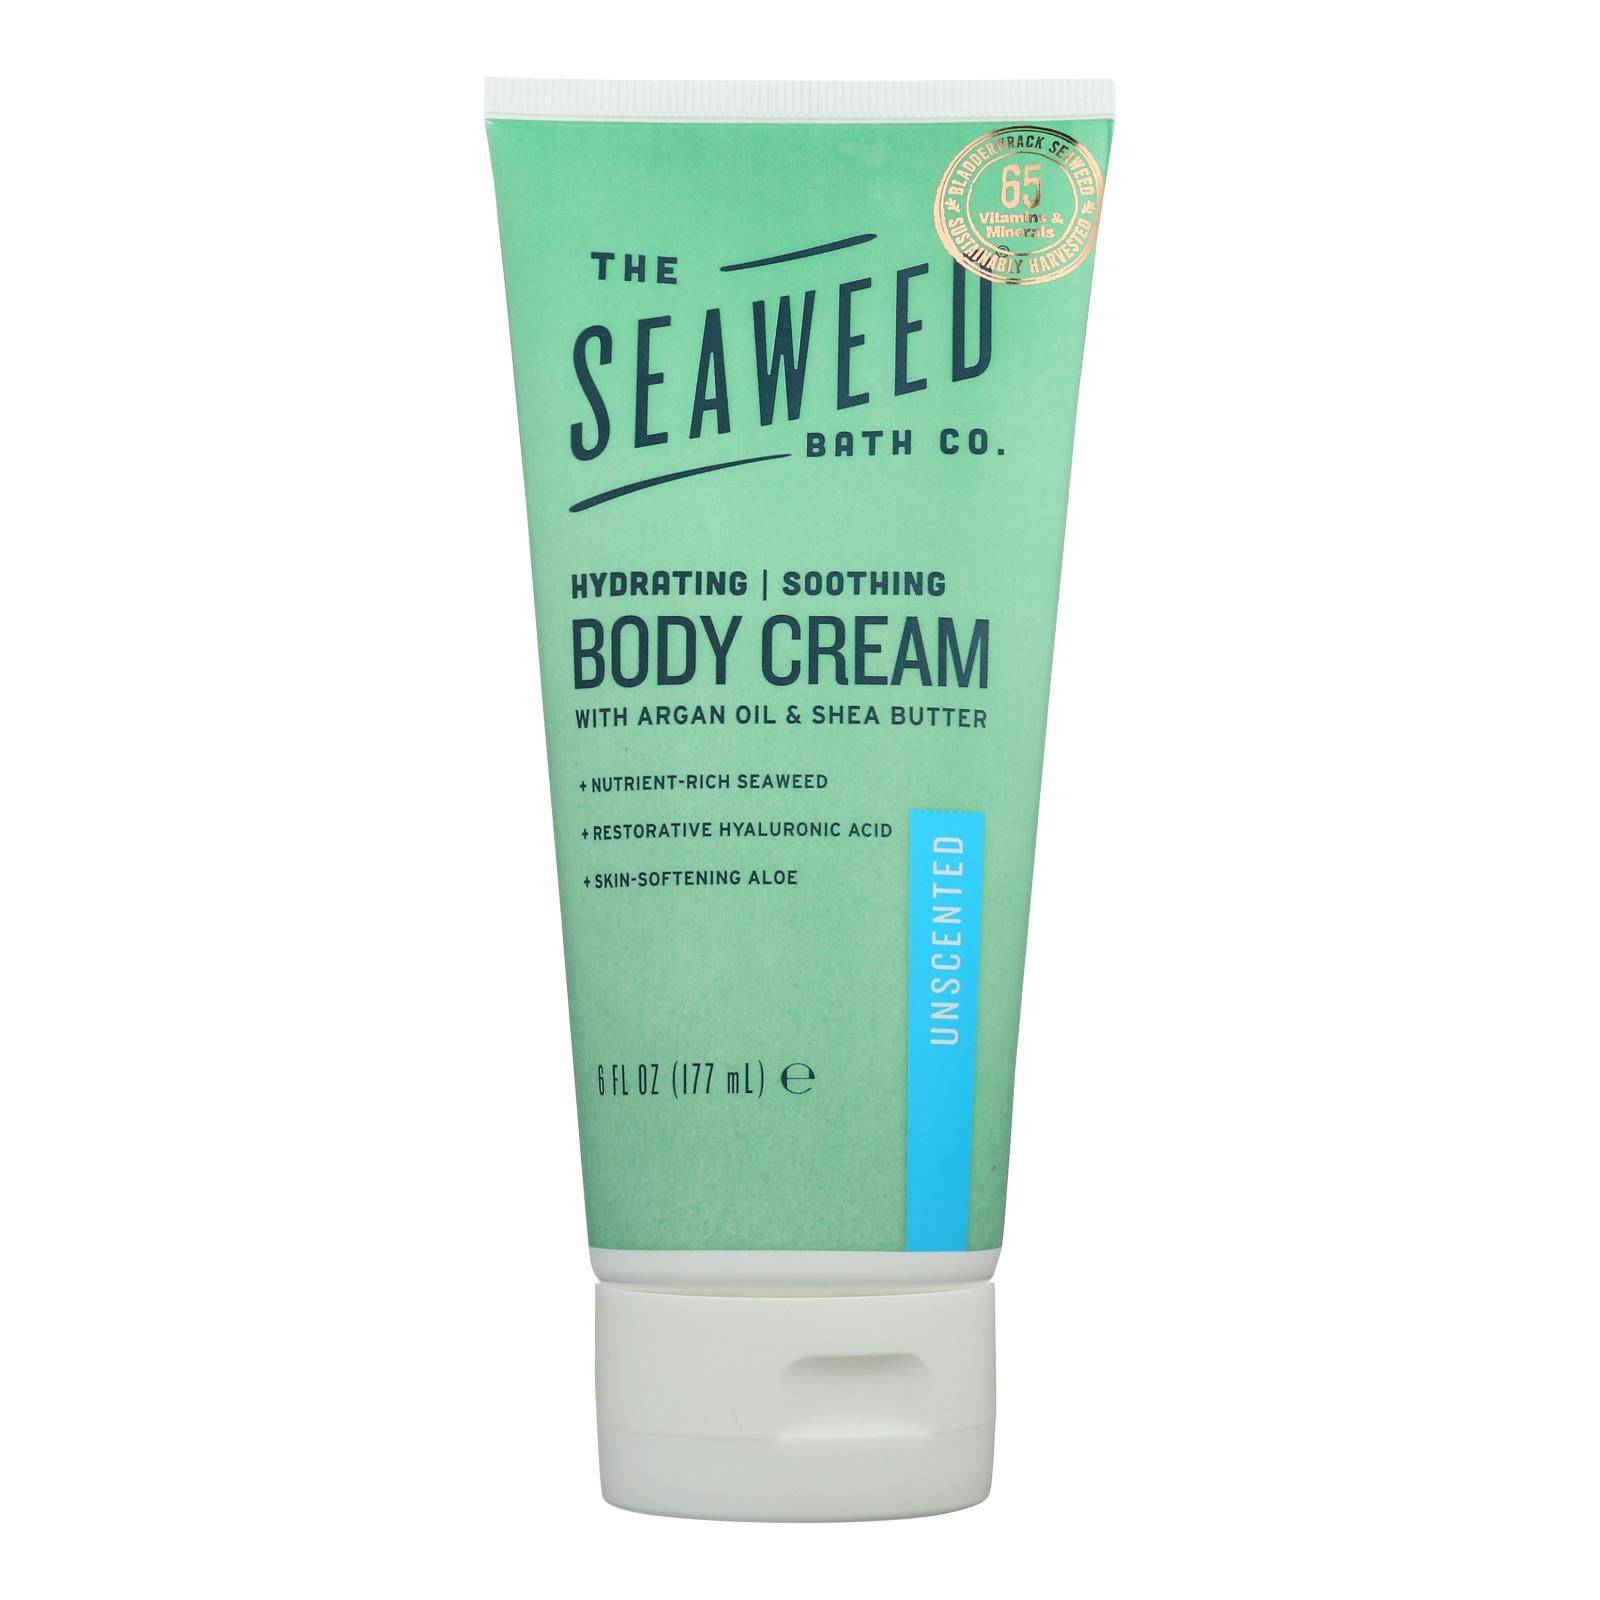 Buy The Seaweed Bath Co Body Cream - Unscented - 6 Oz  at OnlyNaturals.us